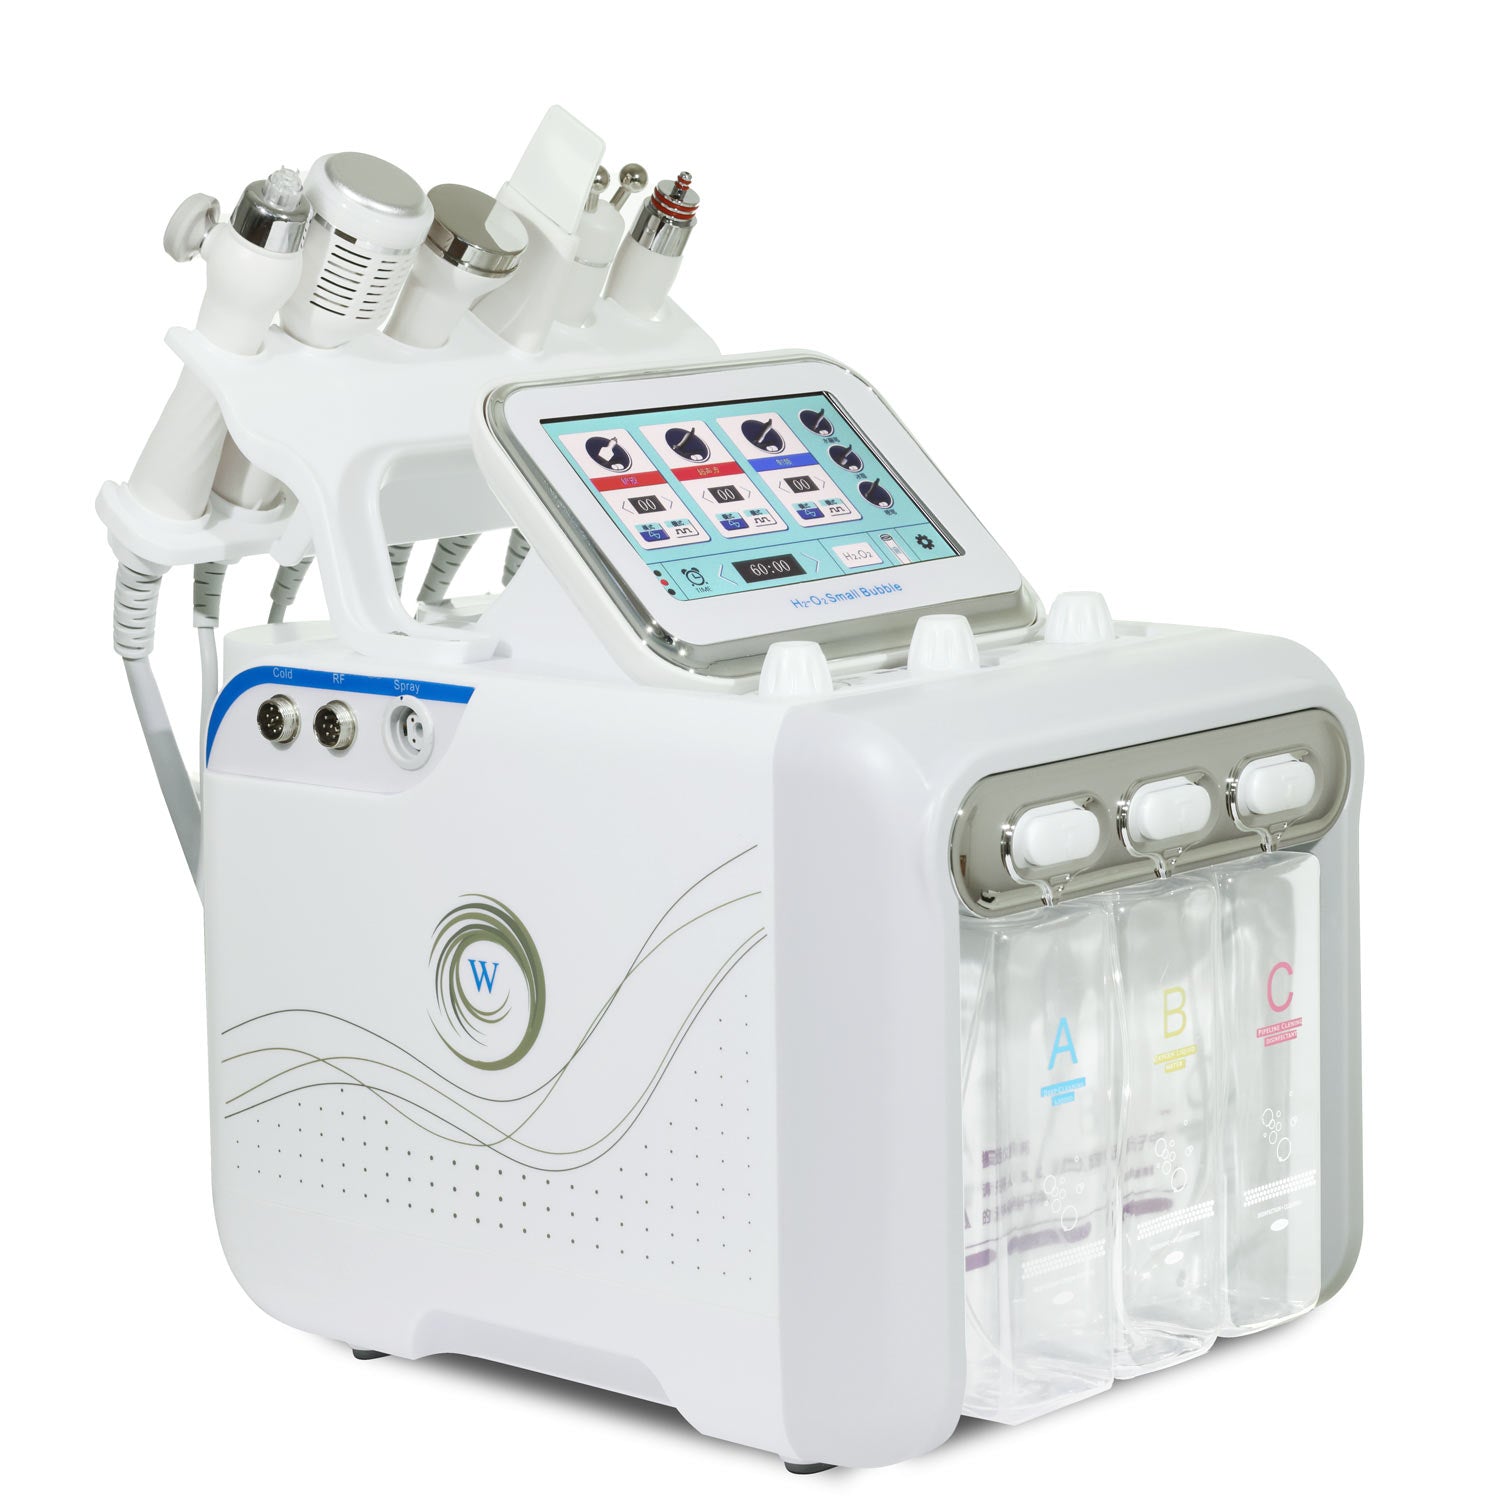 Combi_Hydro_71_AS_combines_6_beauty_treatments_in_one_device